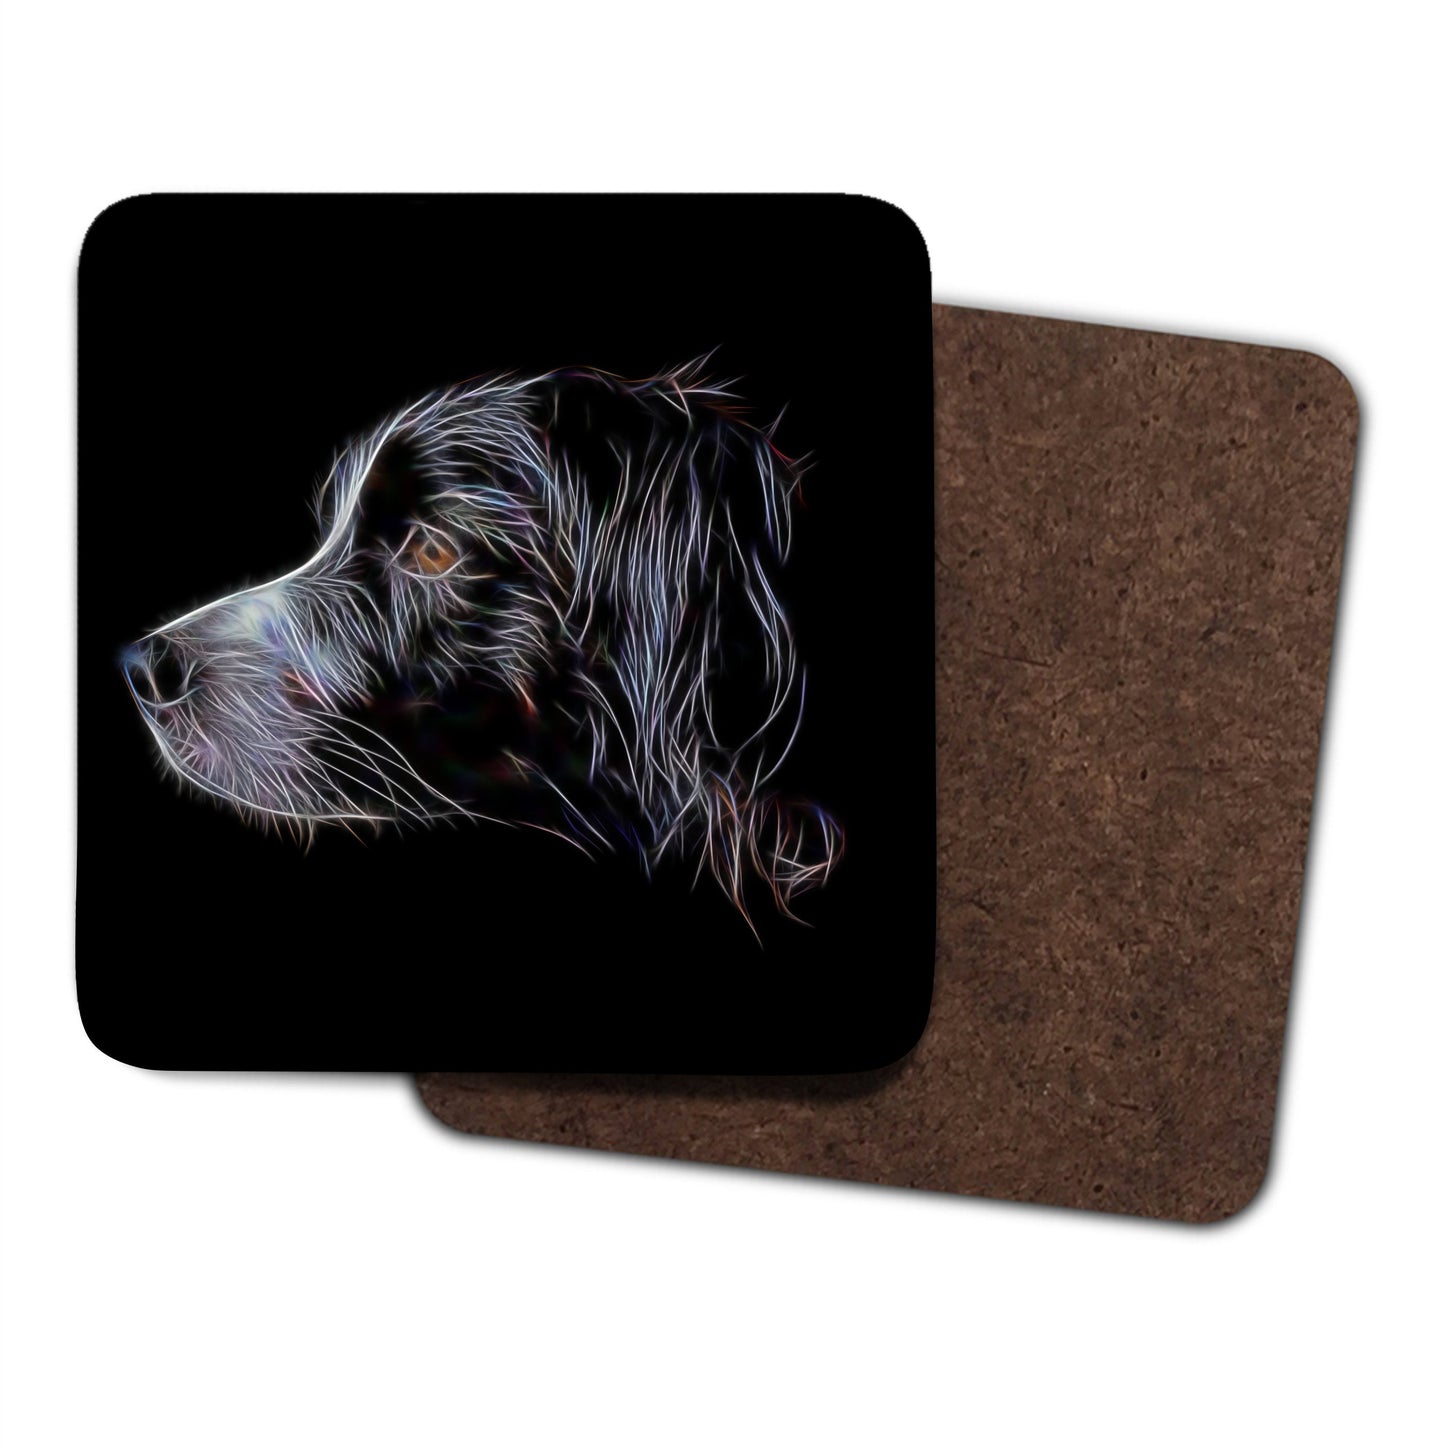 Sprollie Coasters, Set of 4, with Stunning Fractal Art Design. Perfect Dog Owner Gift.